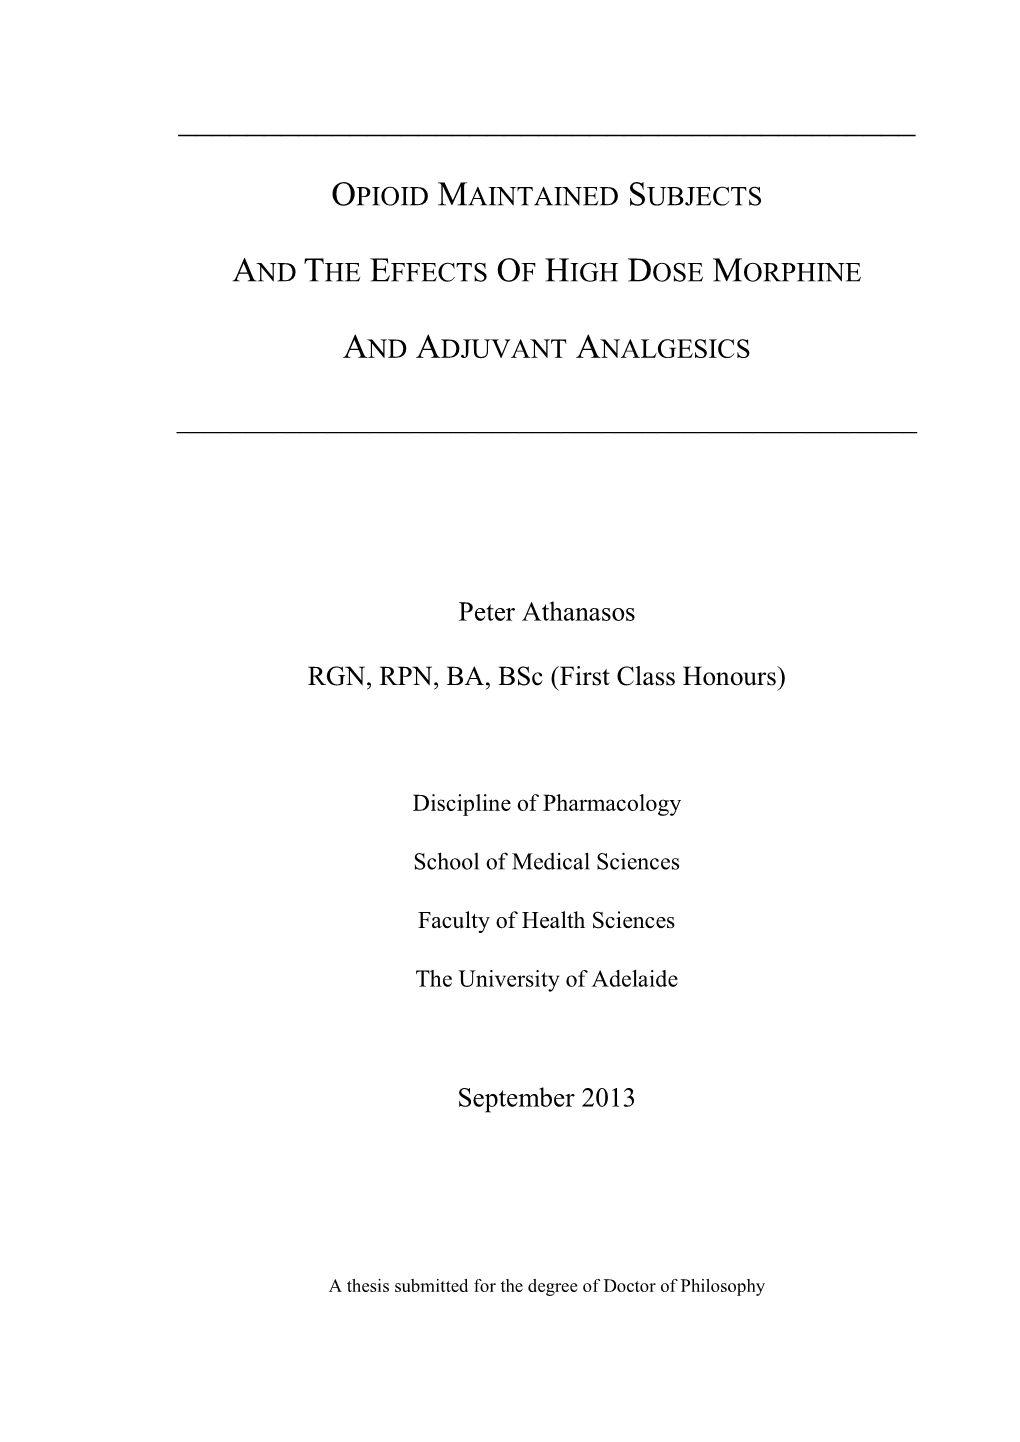 Opioid Maintained Subjects and the Effects of High Dose Morphine